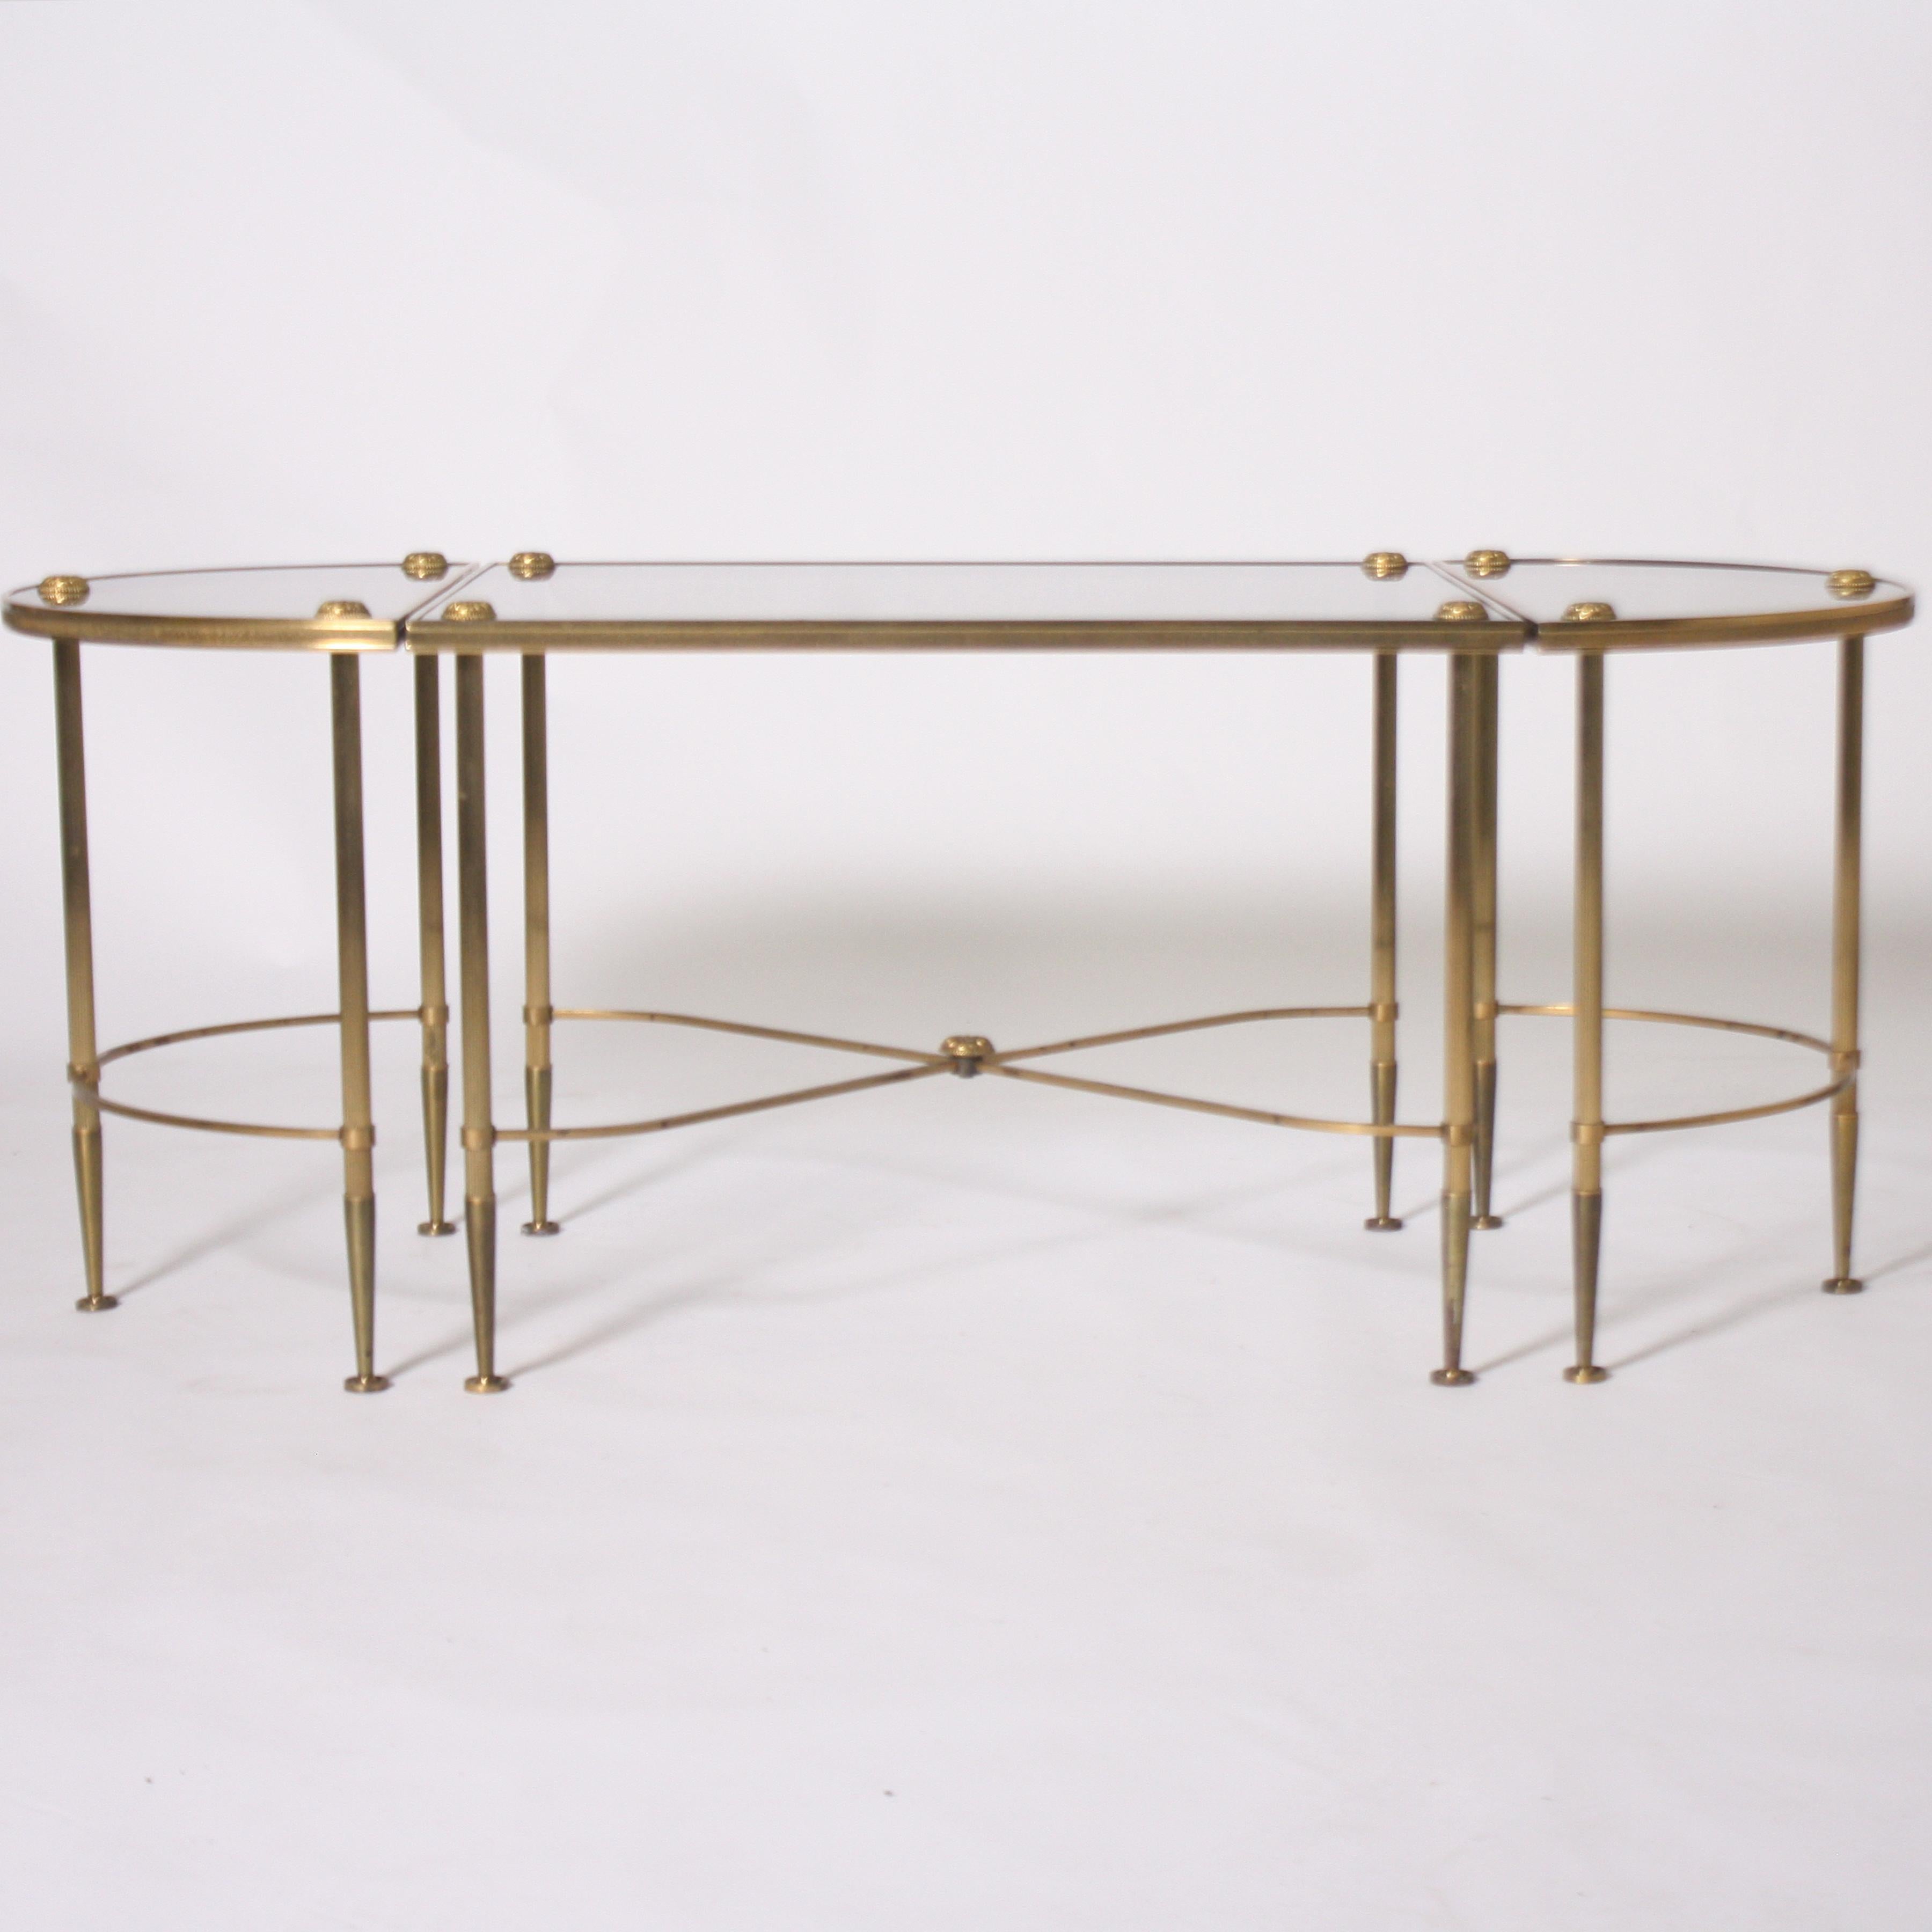 Three-piece brass and glass Bagues coffee table, circa 1950.